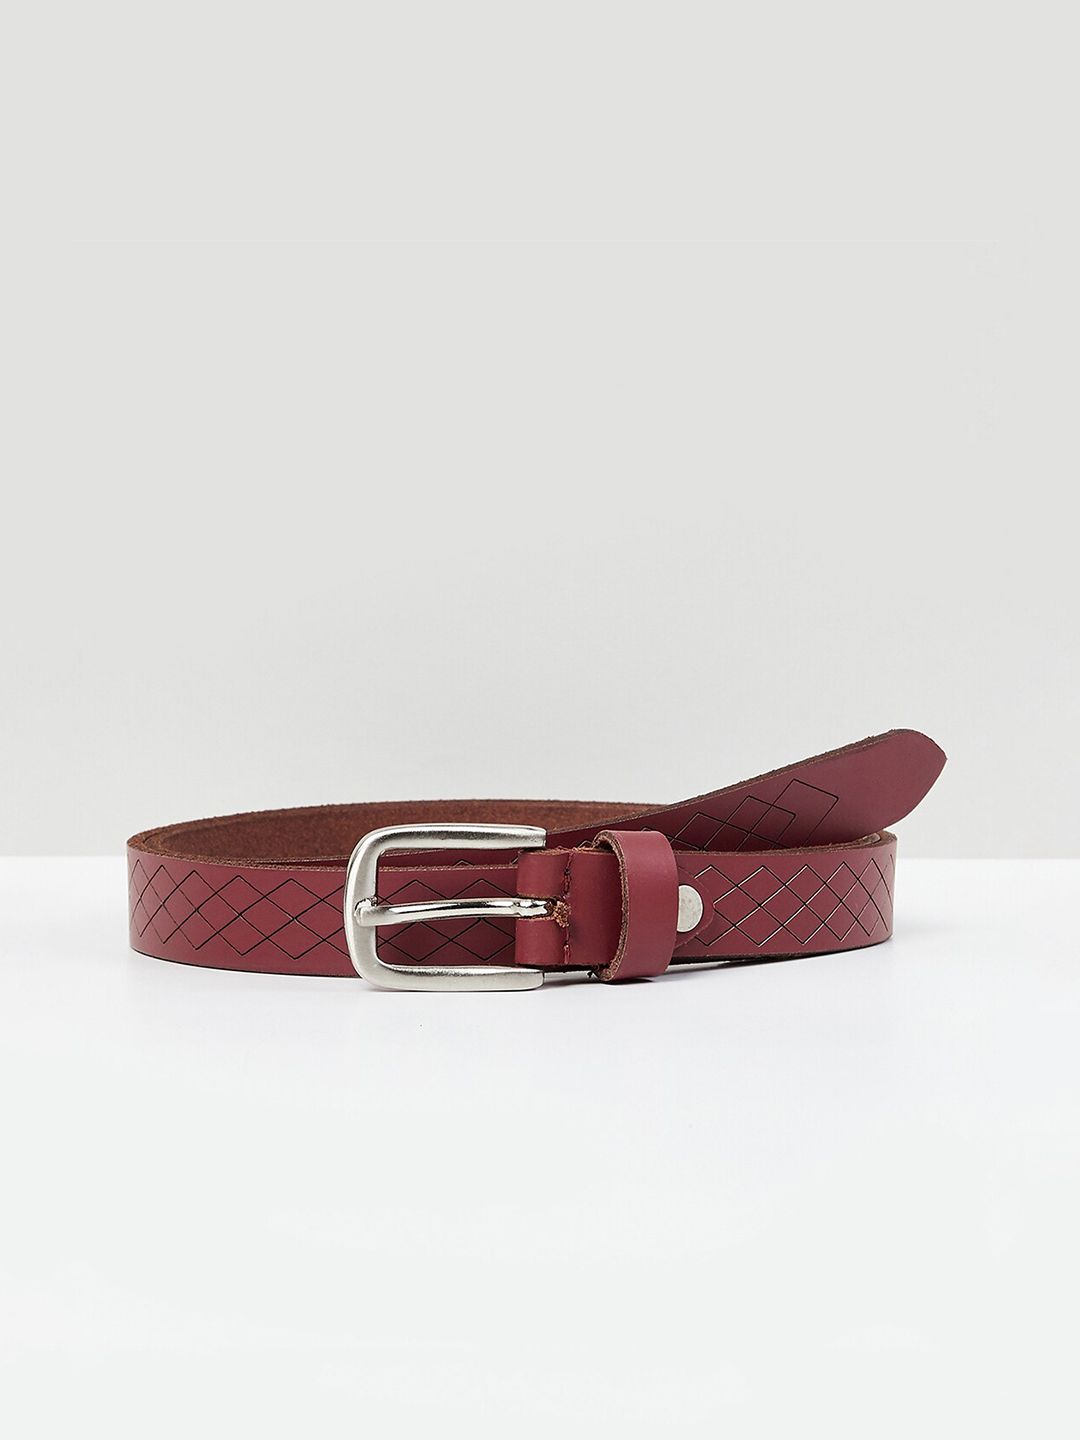 max Women Maroon Textured Leather Belt Price in India